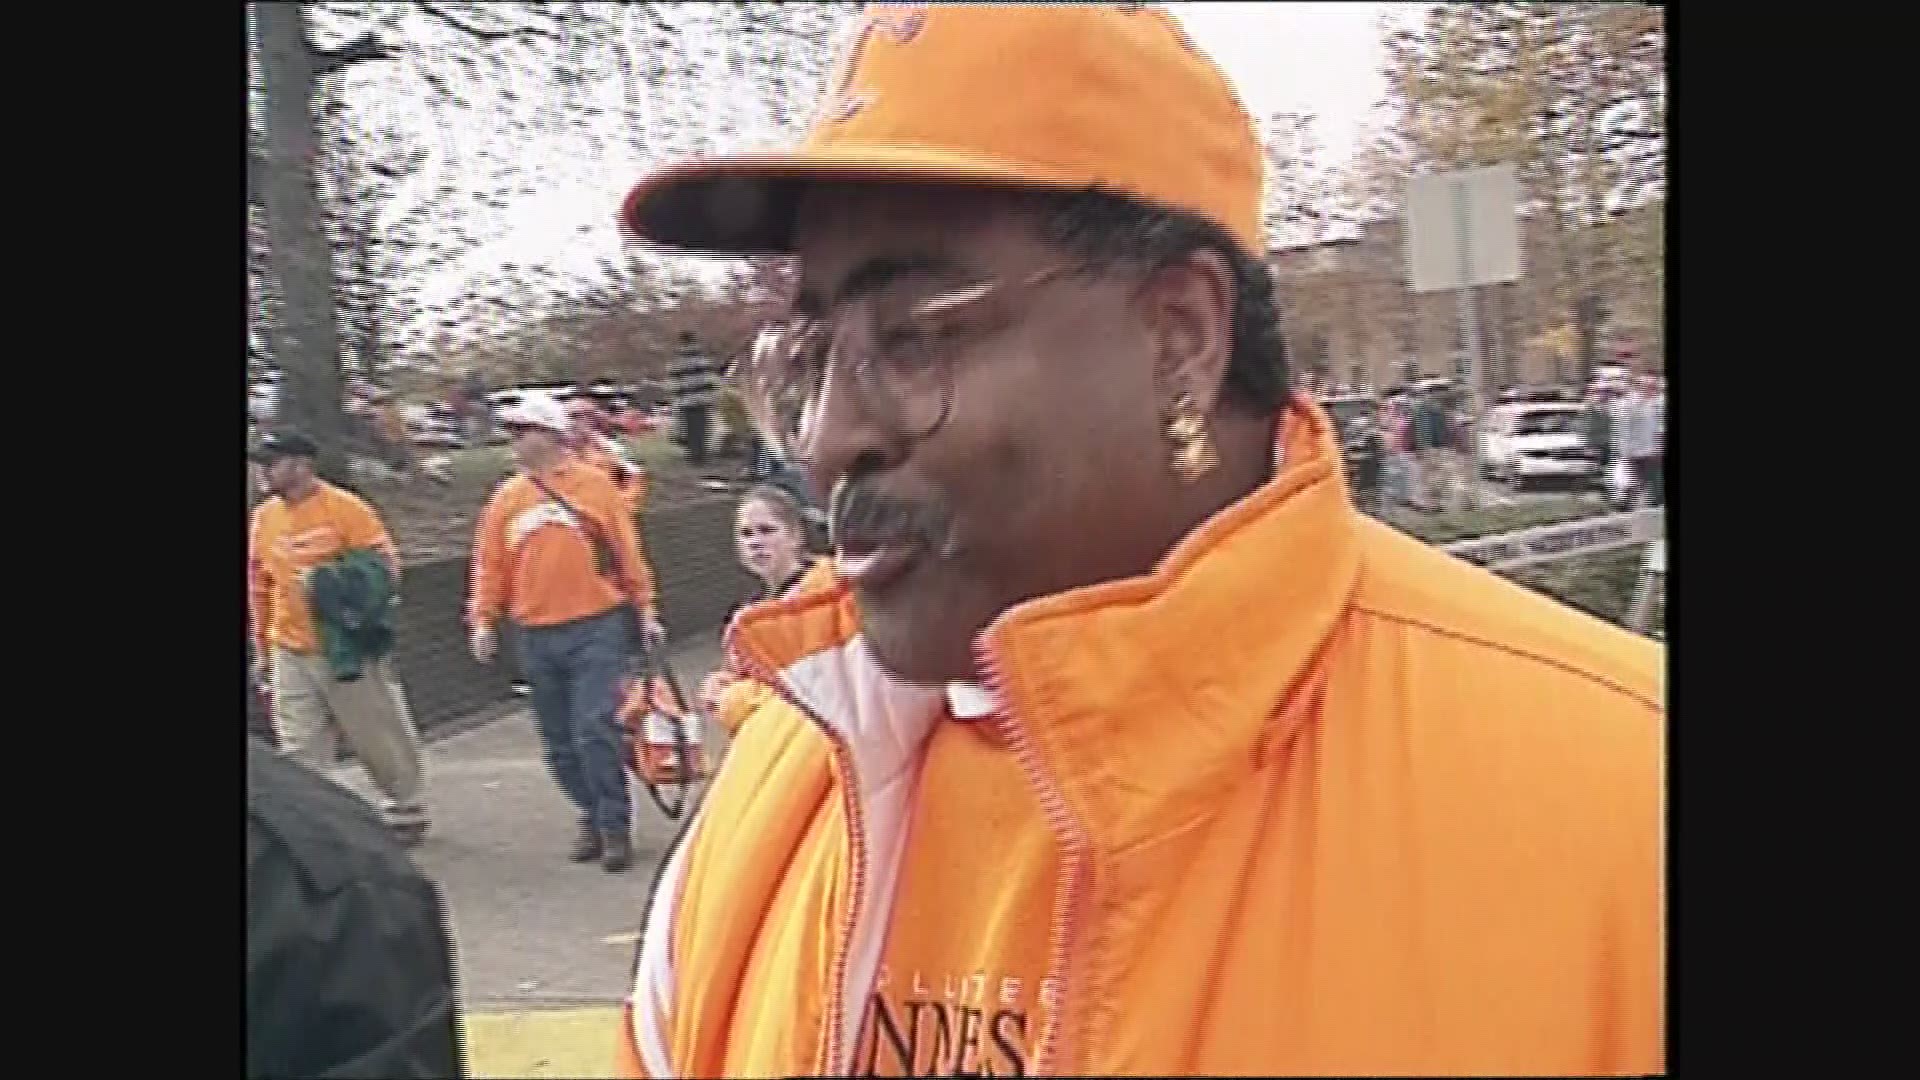 John Ward joined players in the Vol Walk before the November 21, 1998 game against Kentucky. Players insisted Ward was "part of the team."